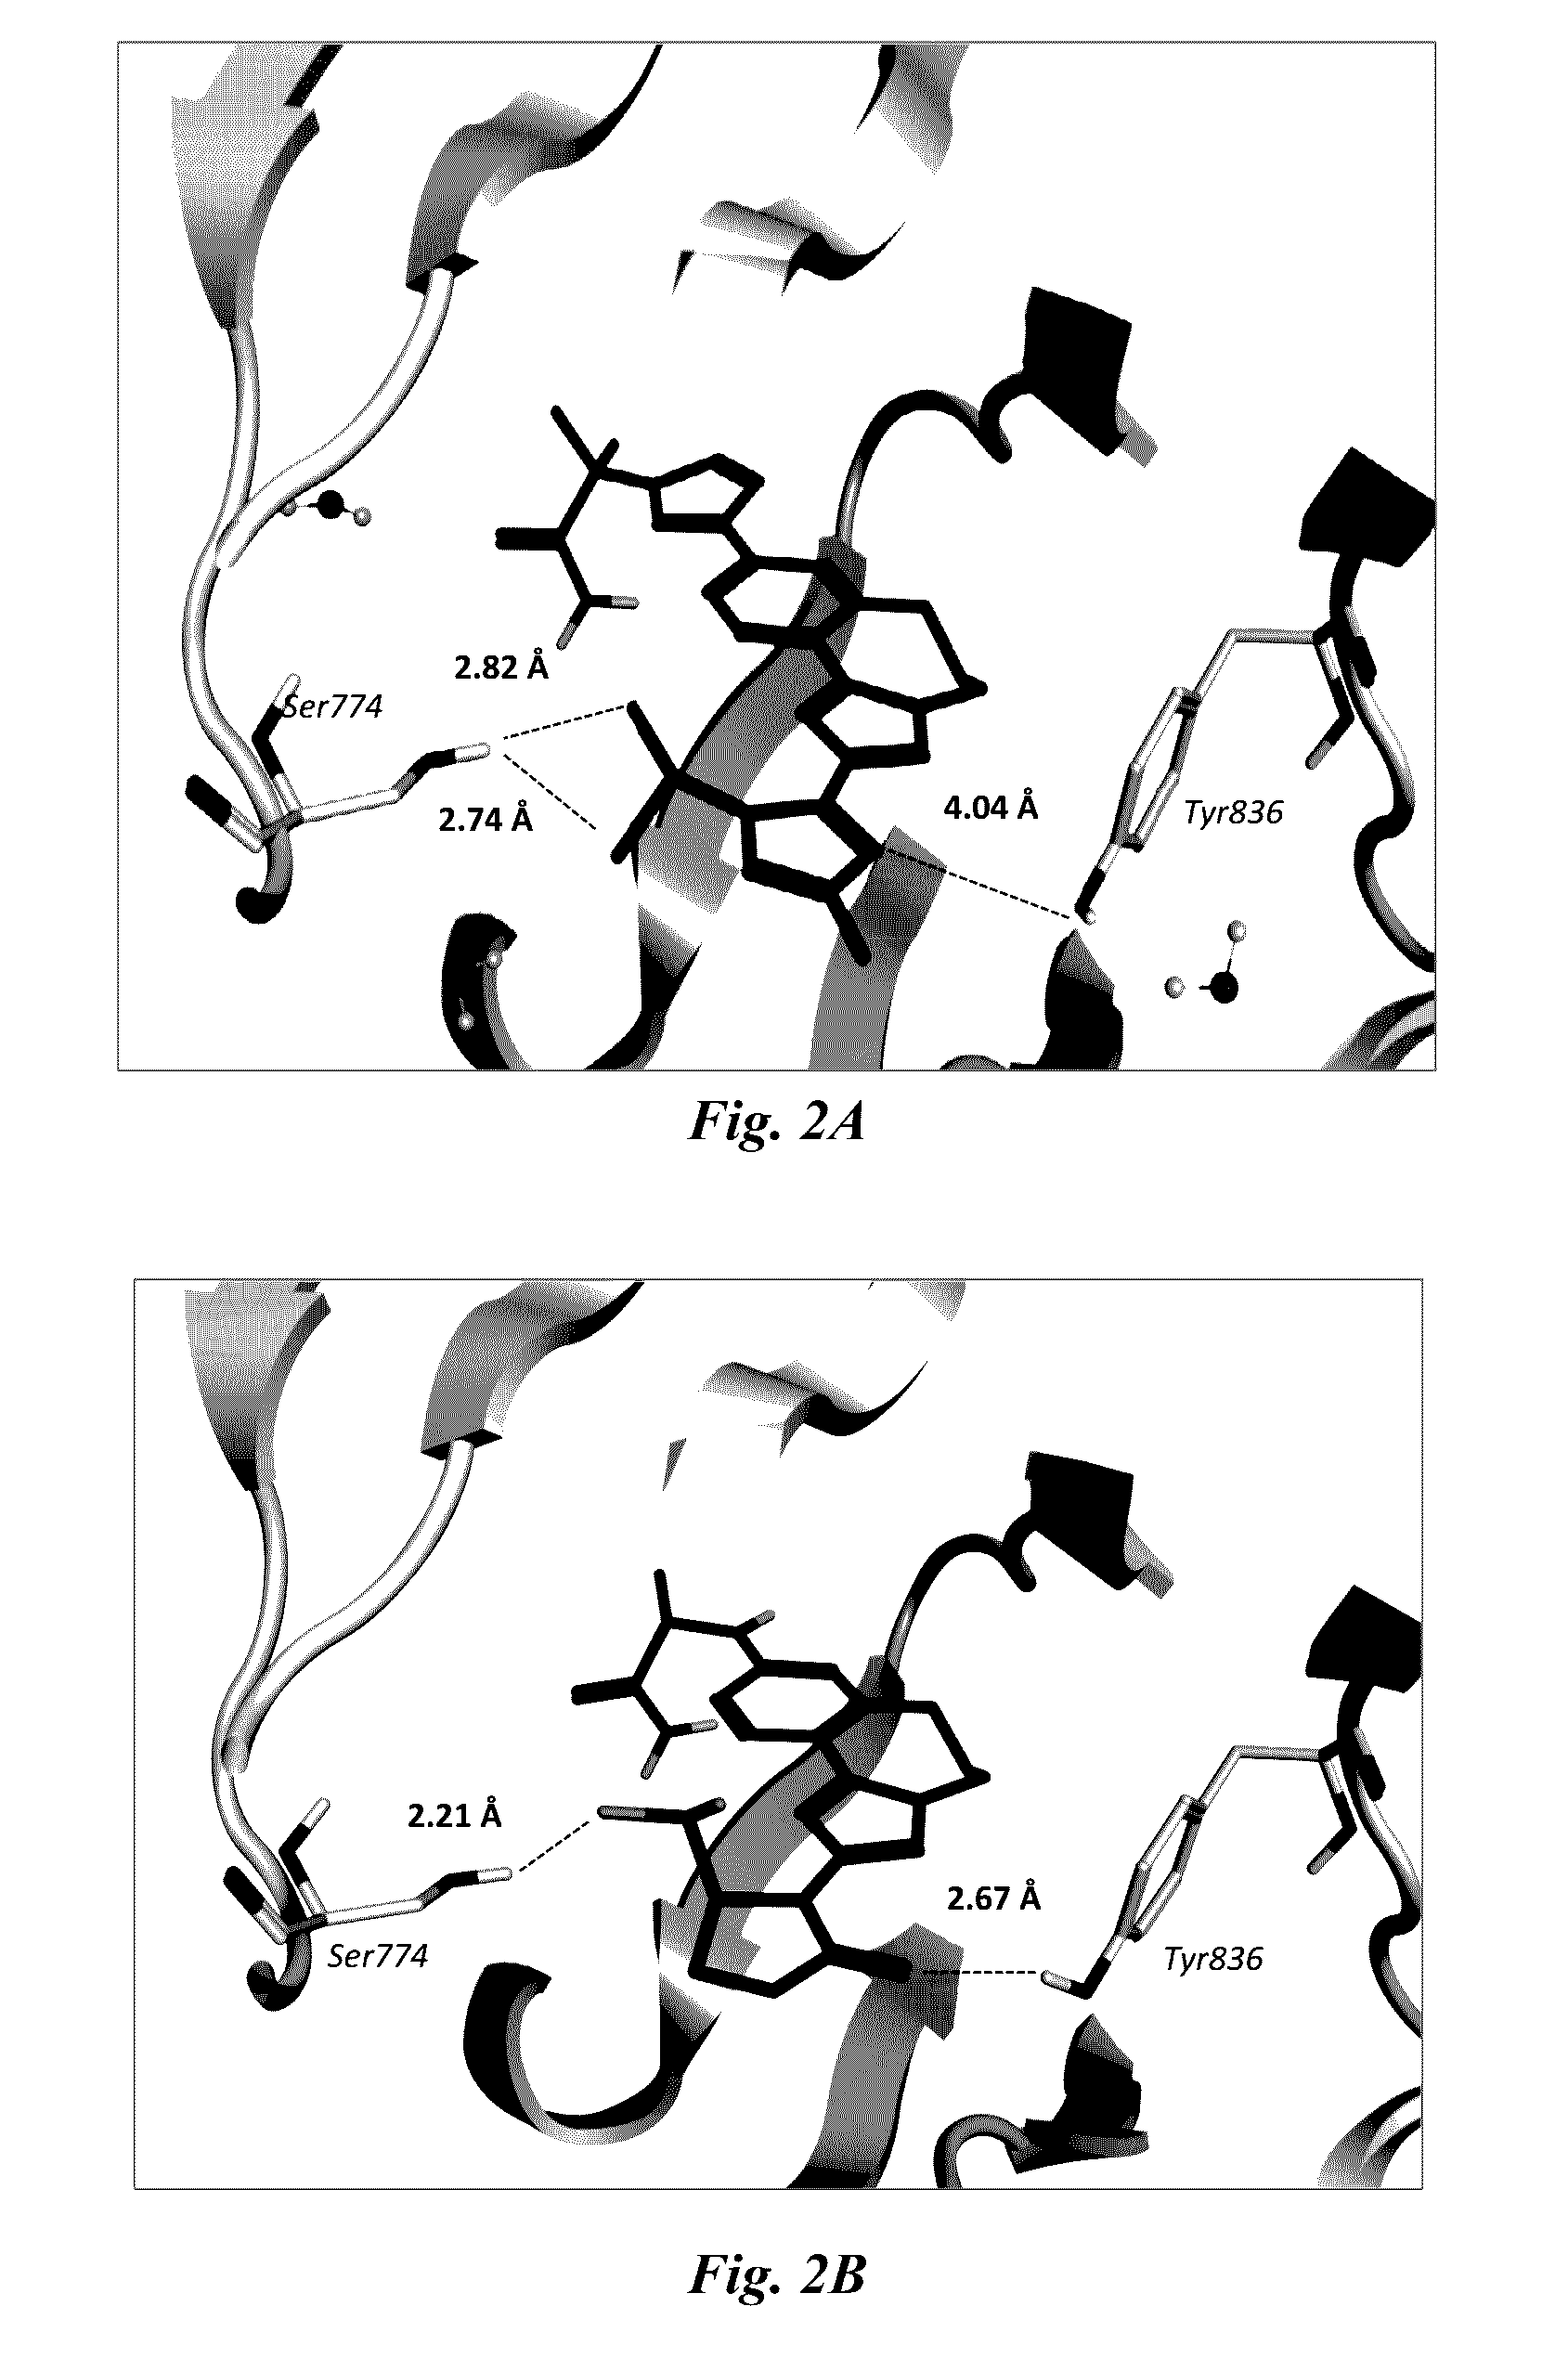 Benzoxazepin oxazolidinone compounds and methods of use